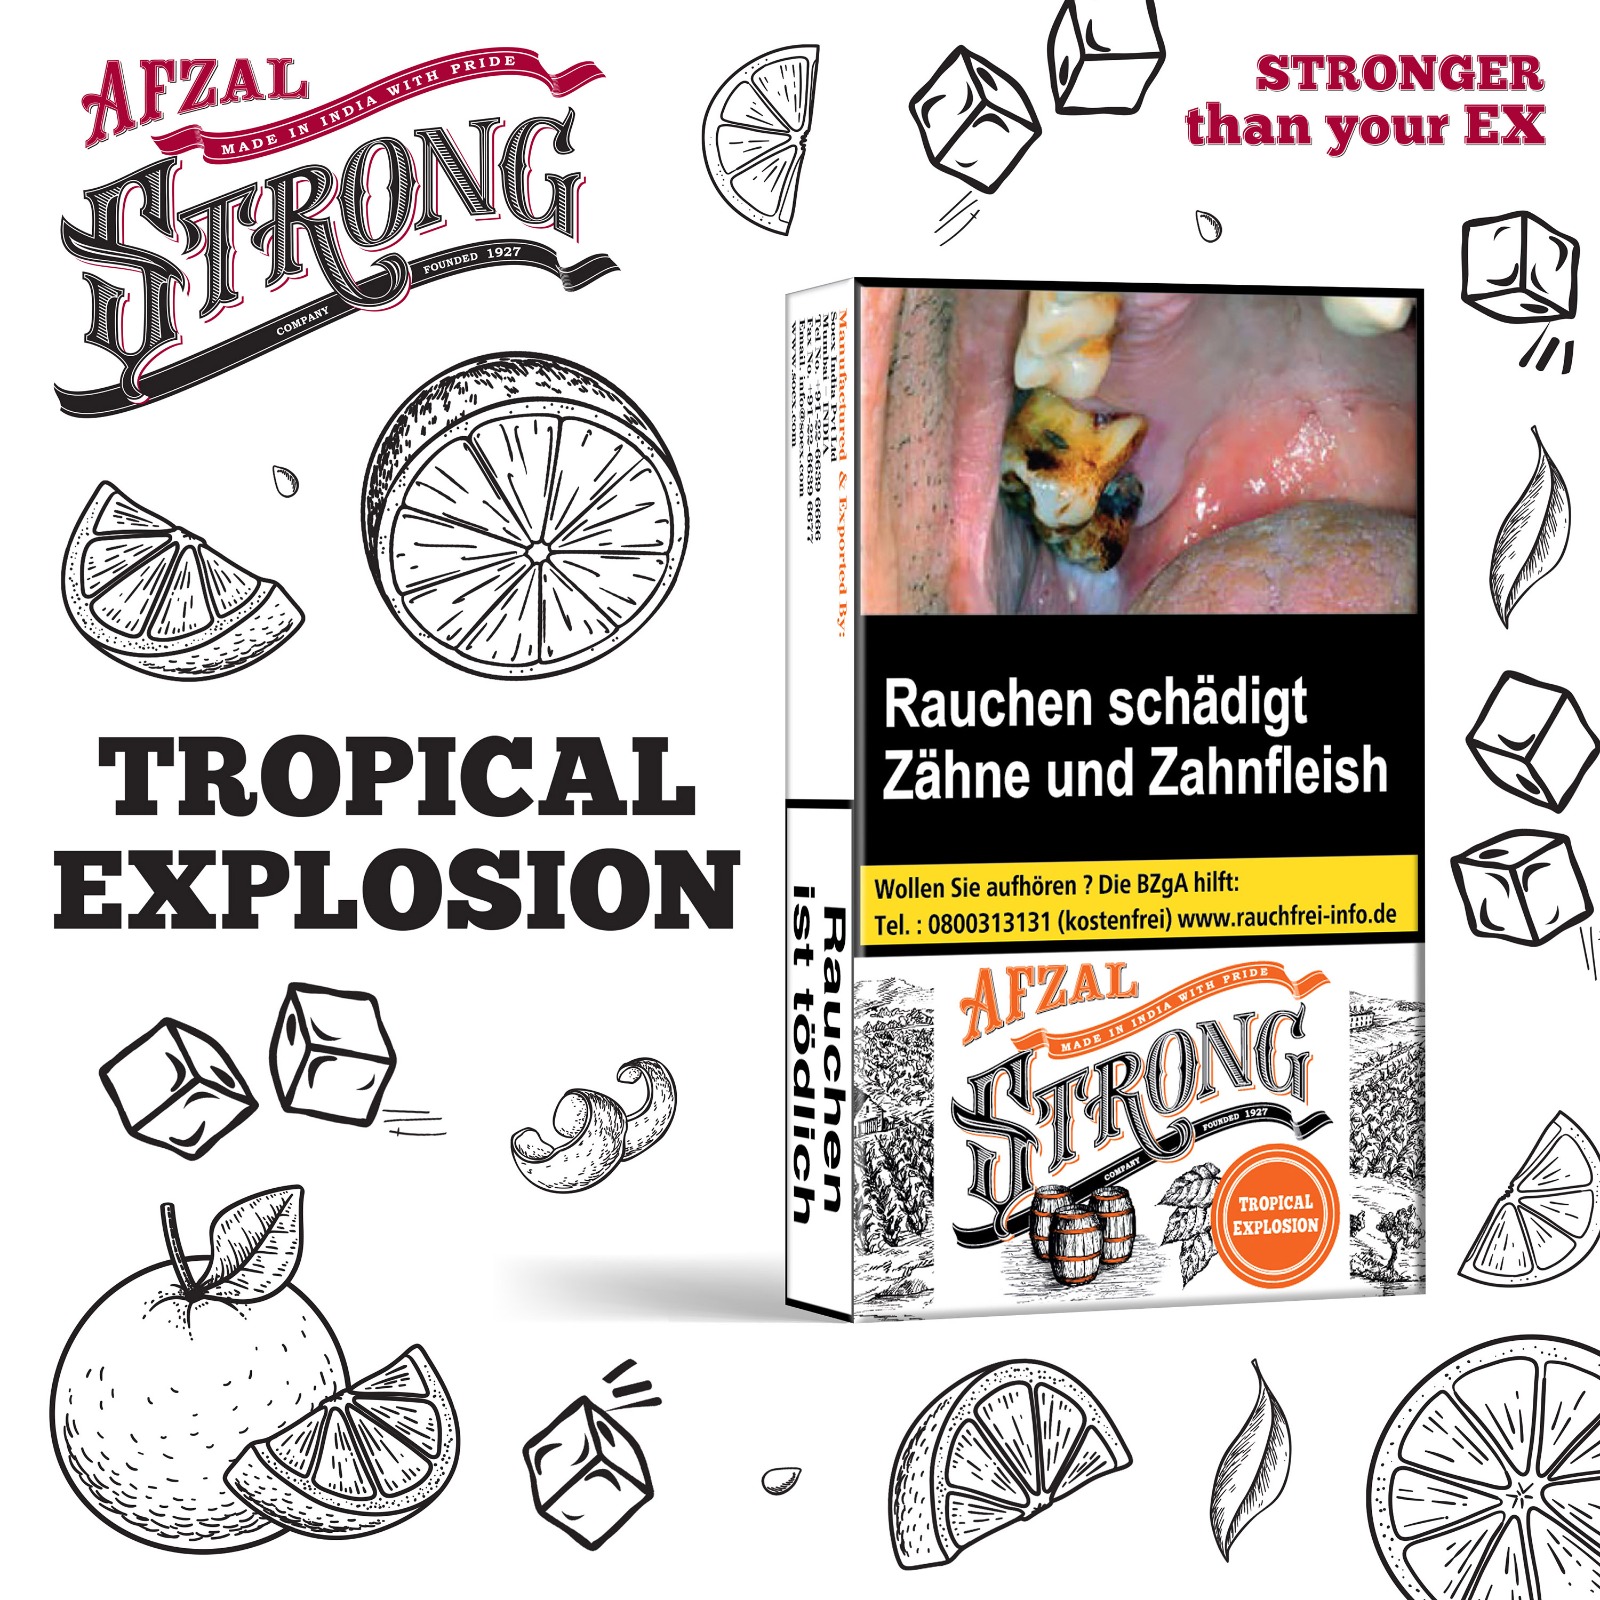 TROPICAL EXPLOSION "XTREME" | AFZAL STRONG